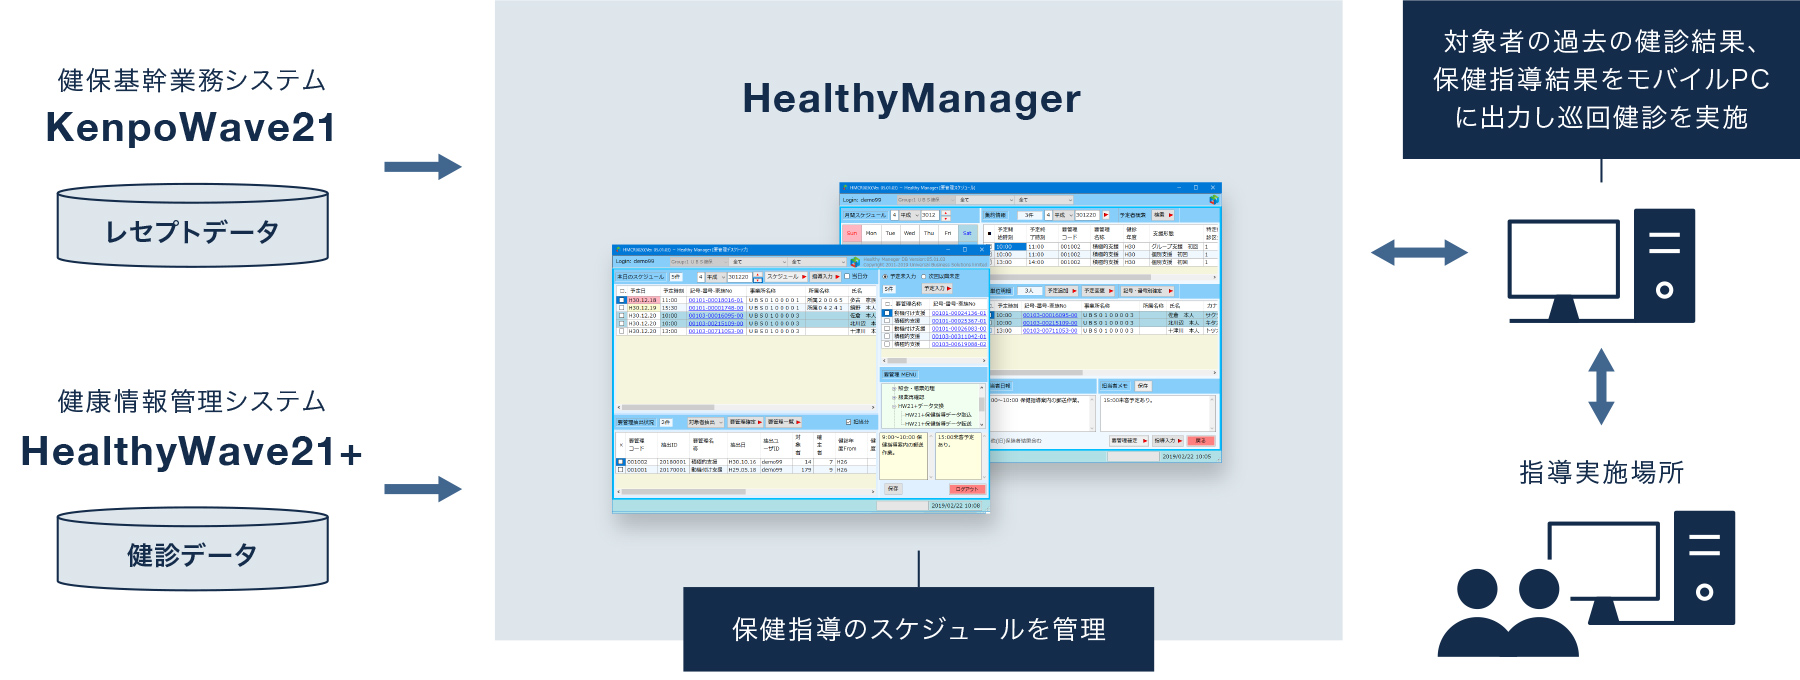 HealthyManager